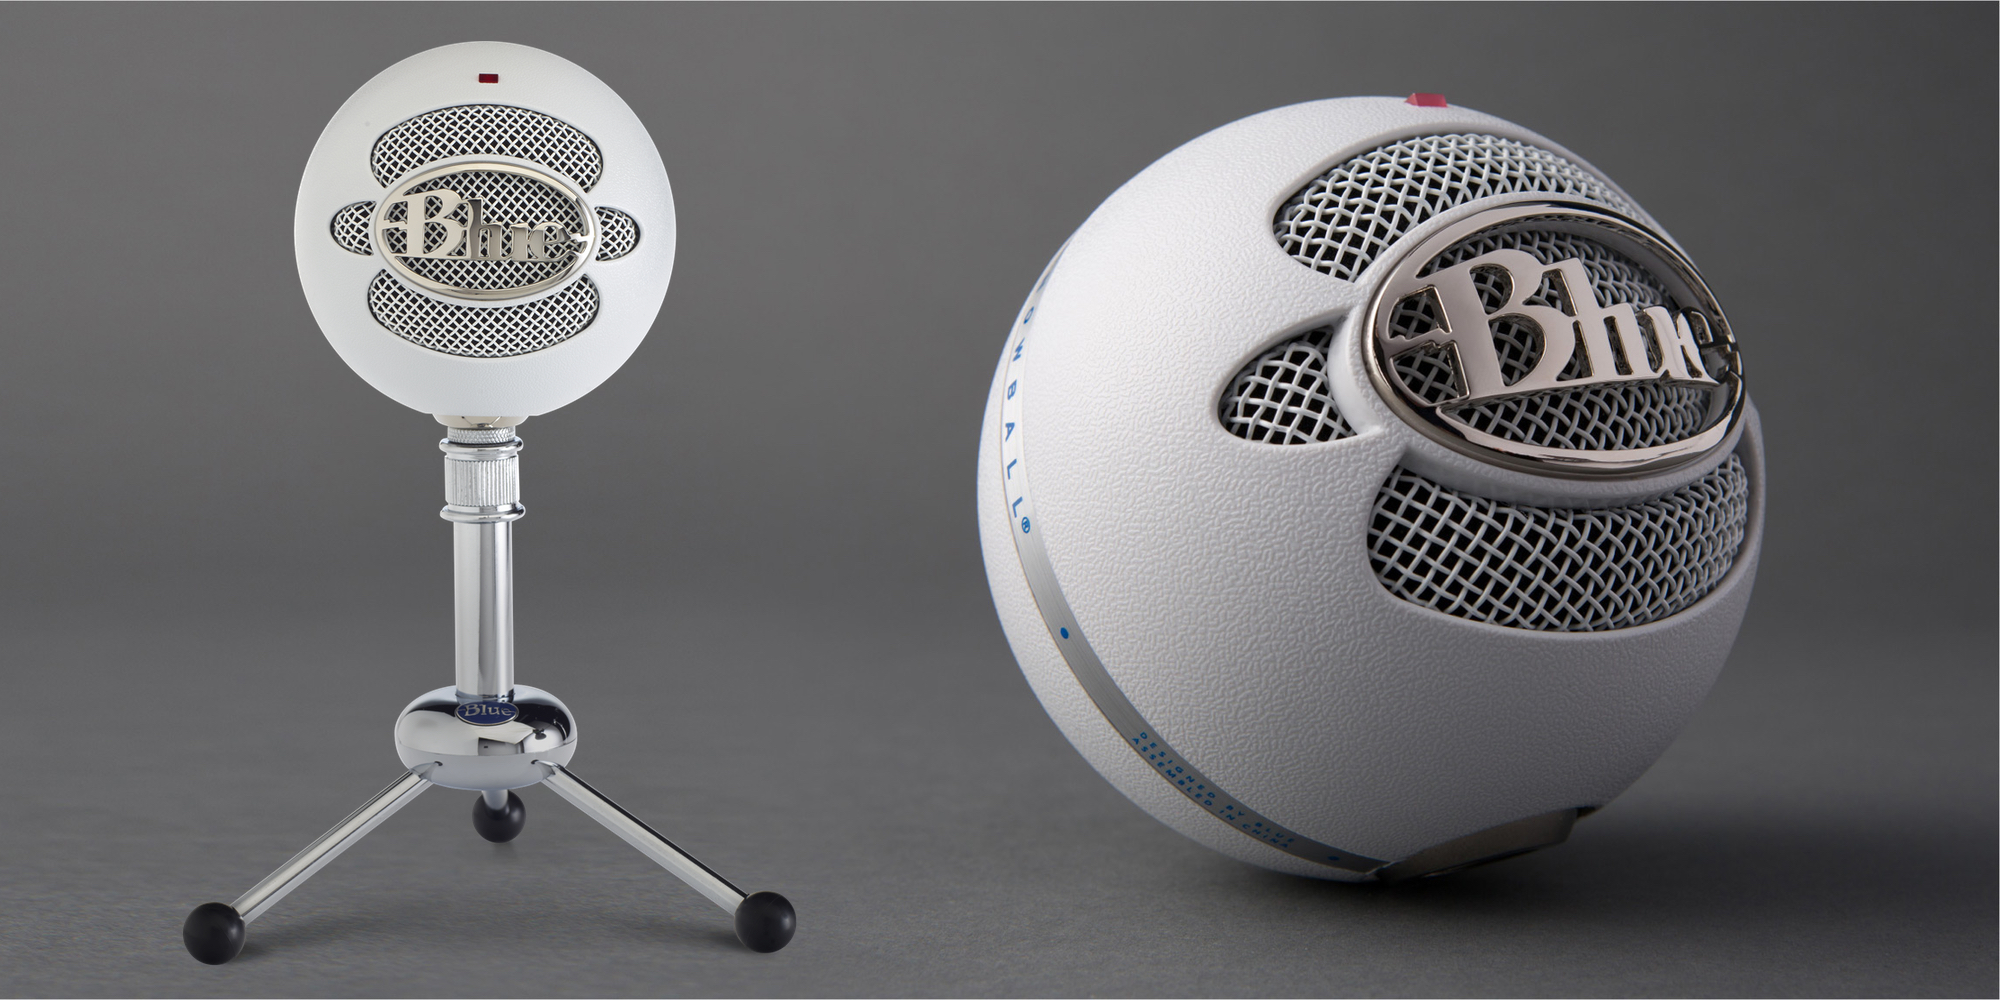 Blue's Snowball USB mic works with iPad Pro, now $39 shipped ($30 off)